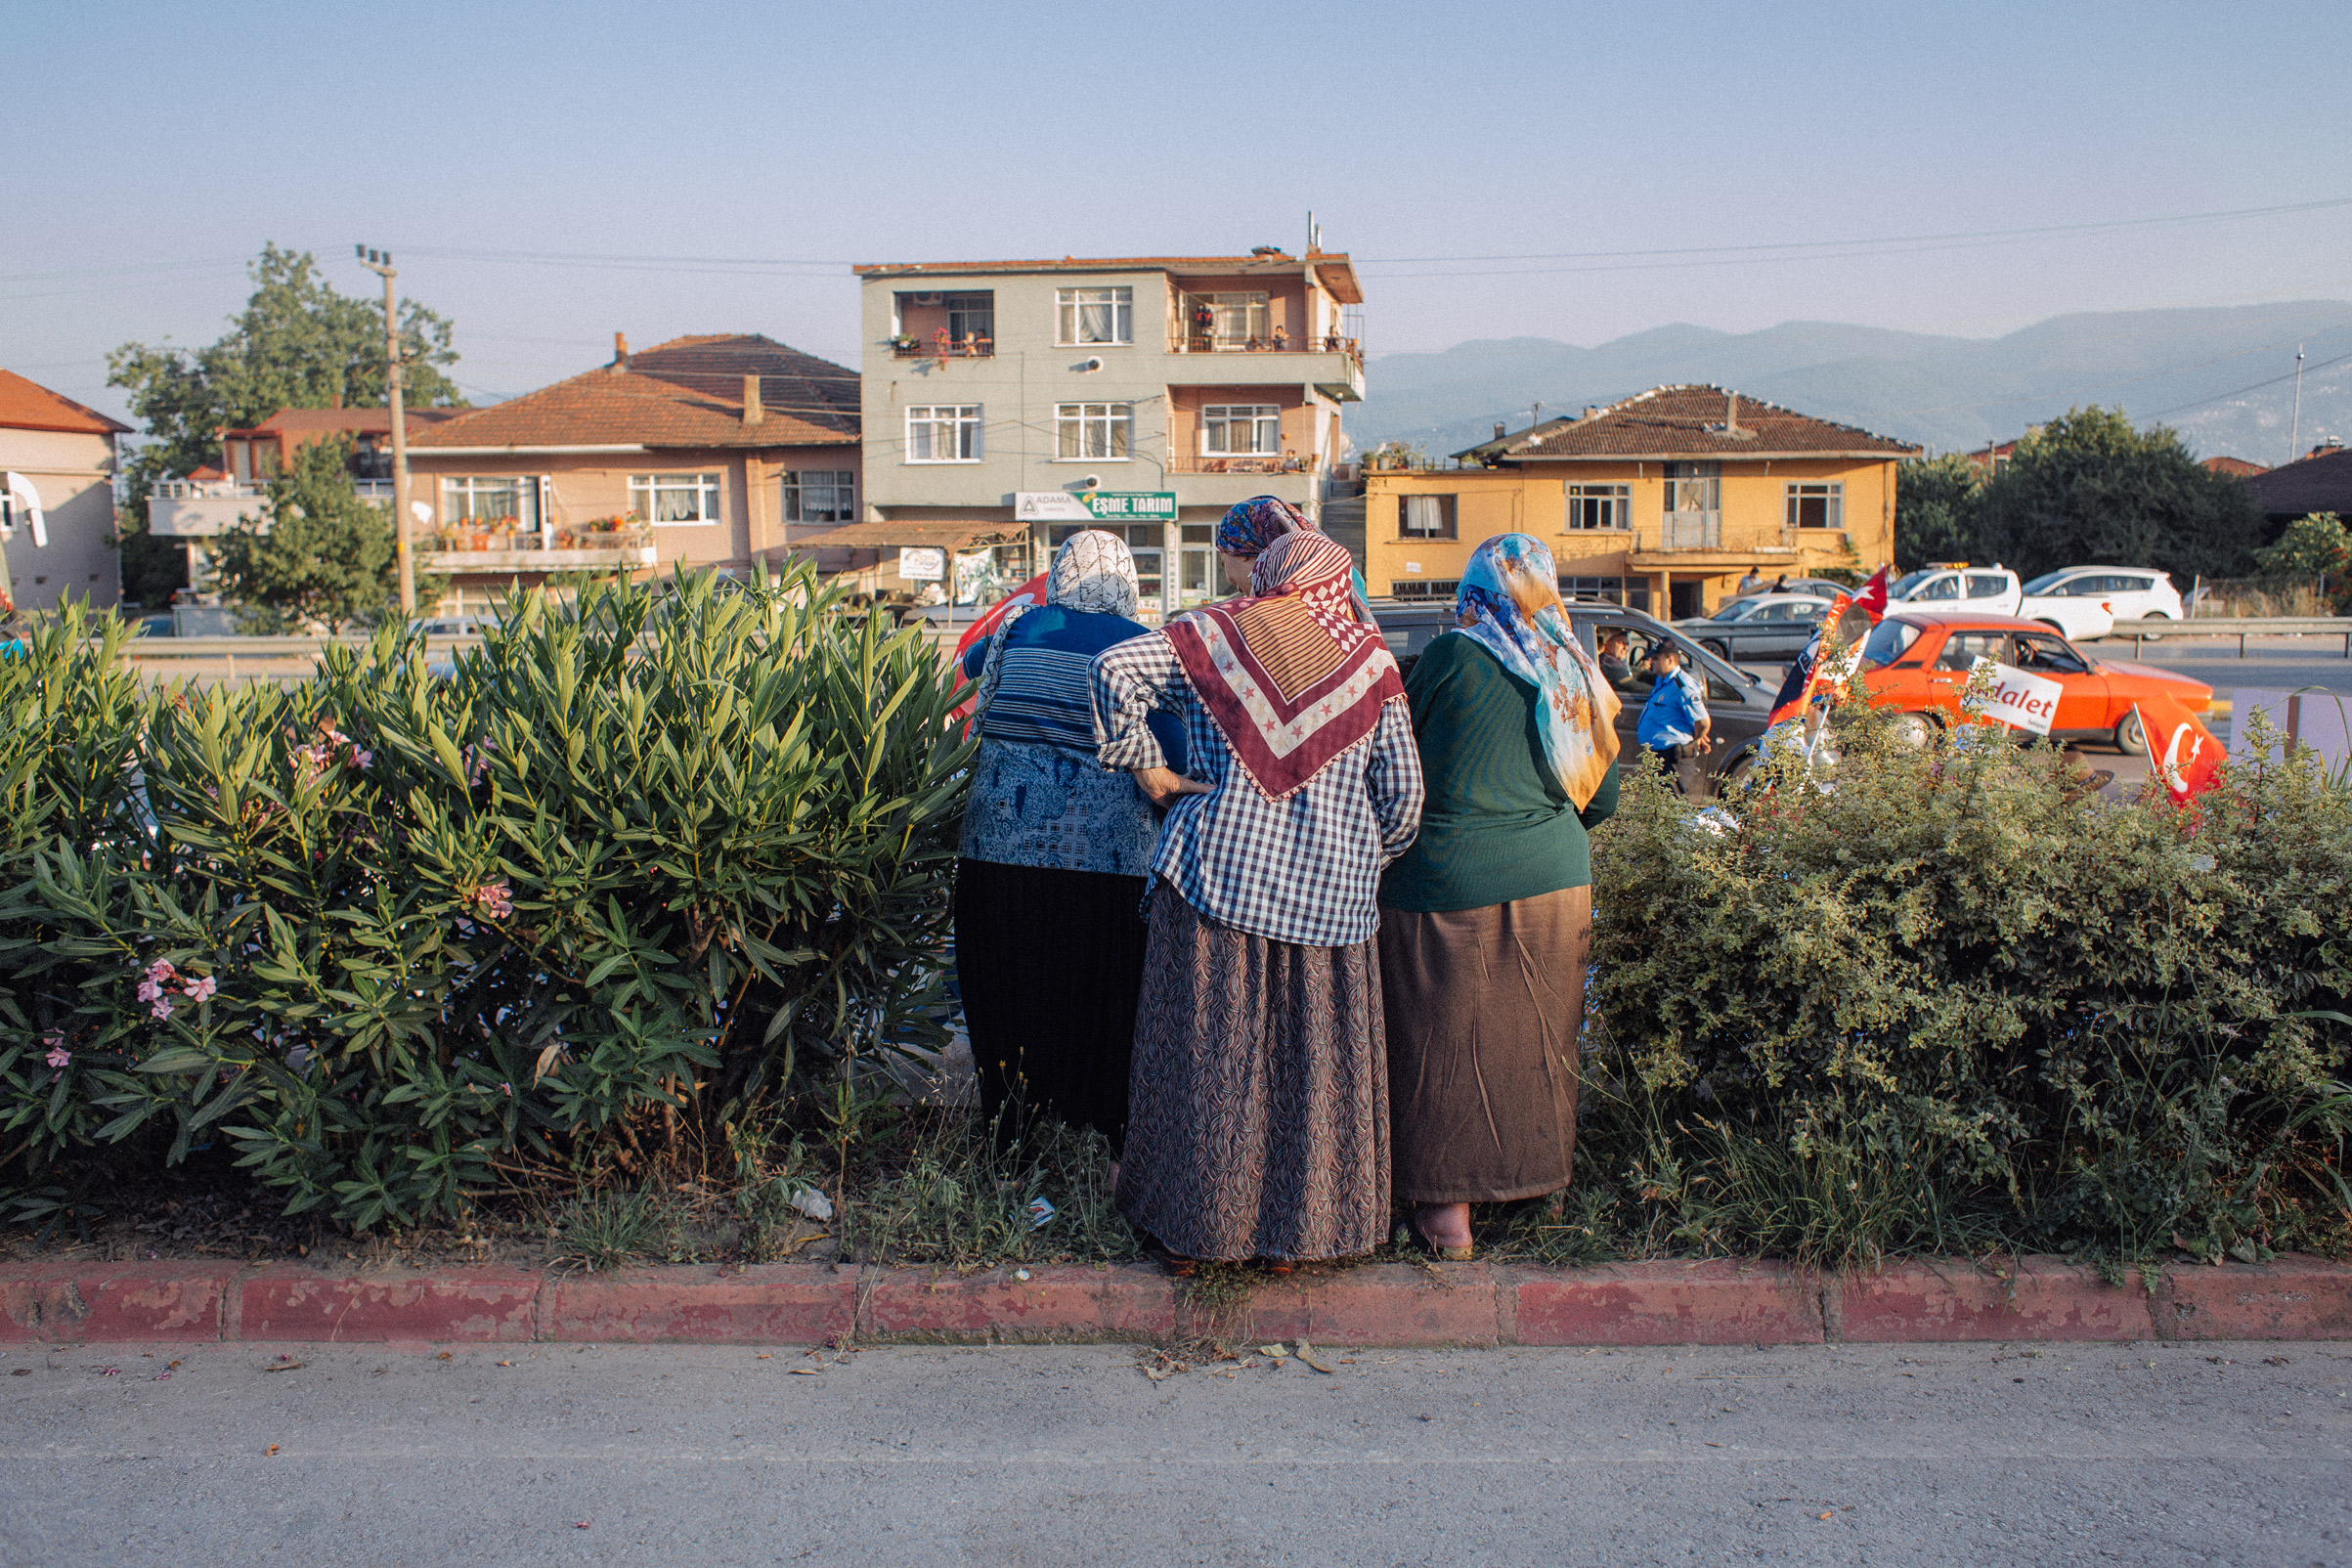 Women watch the Justice March proceed along the highway in Kartepe, Turkey, as the opposition party CHP (Republican People’s Party) leader Kemal Kilicdaroglu walked with thousands of supporters from Ankara to Istanbul, July 2, 2017.